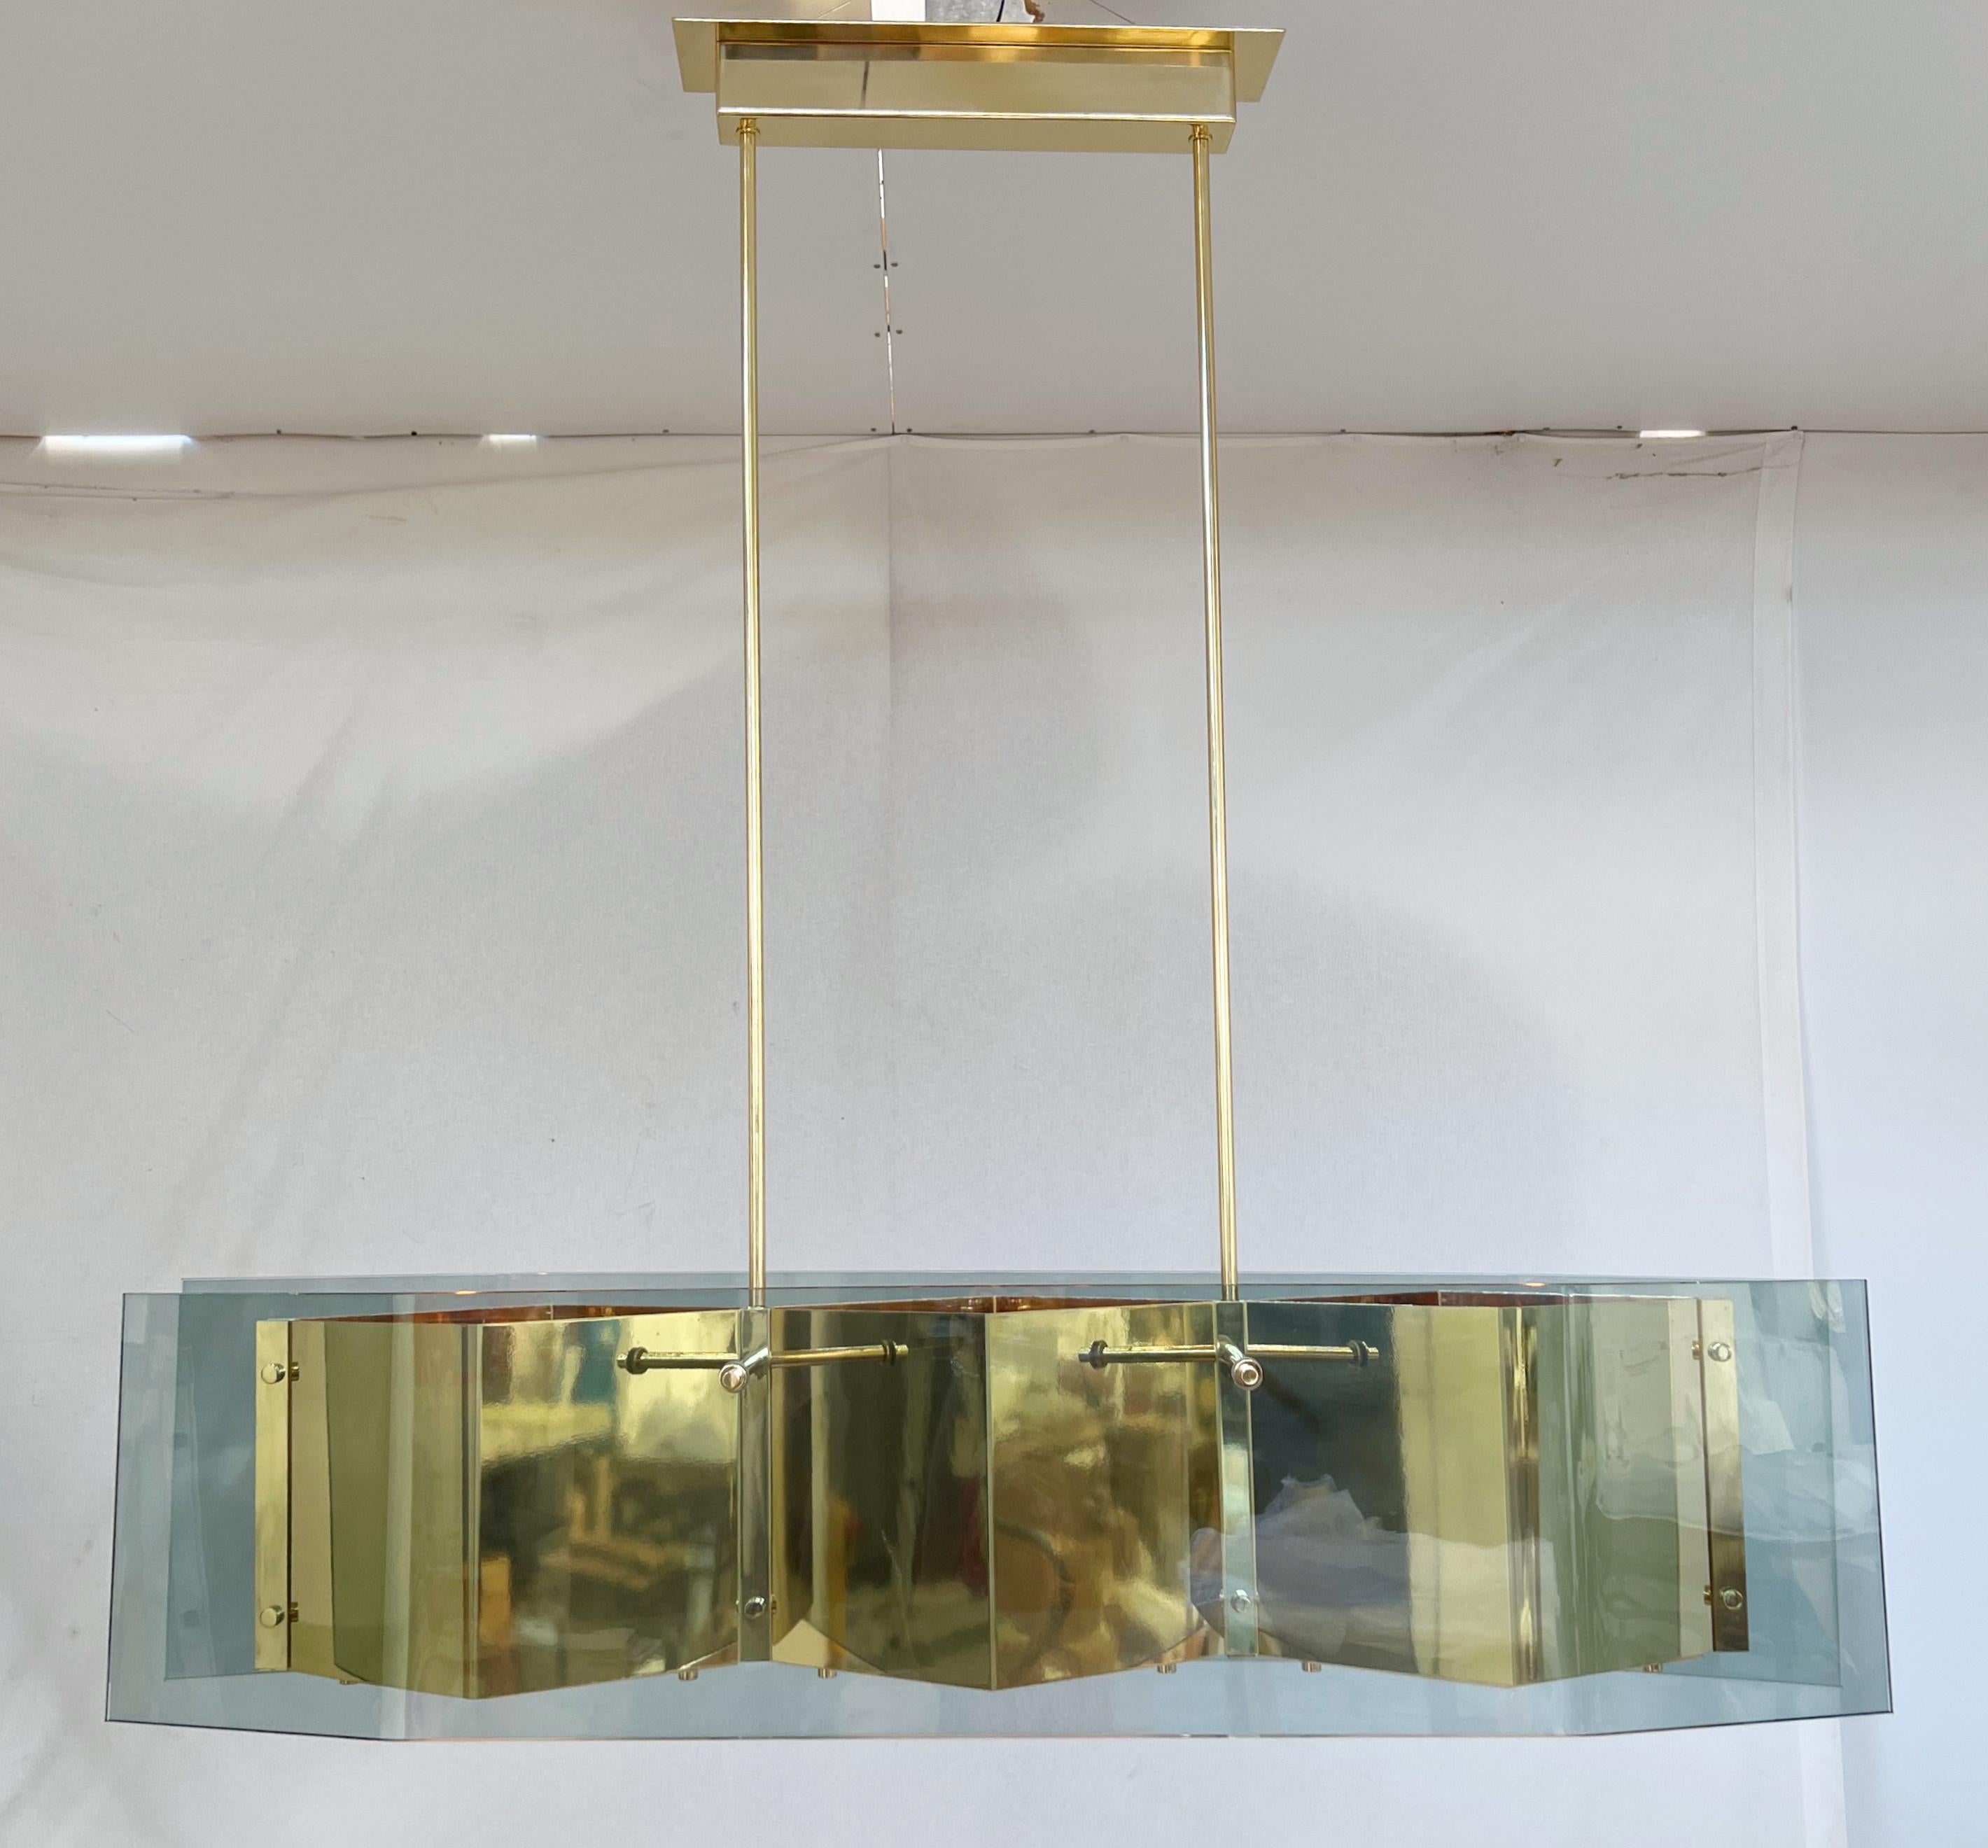 Italian modern chandelier with elongated light green glass panels mounted on polished brass frame with diamond shaped bottom glass diffusers / Made in Italy
Measures: width 52.5 inches / depth 10.5 inches / height 12.5 inches / total height 51